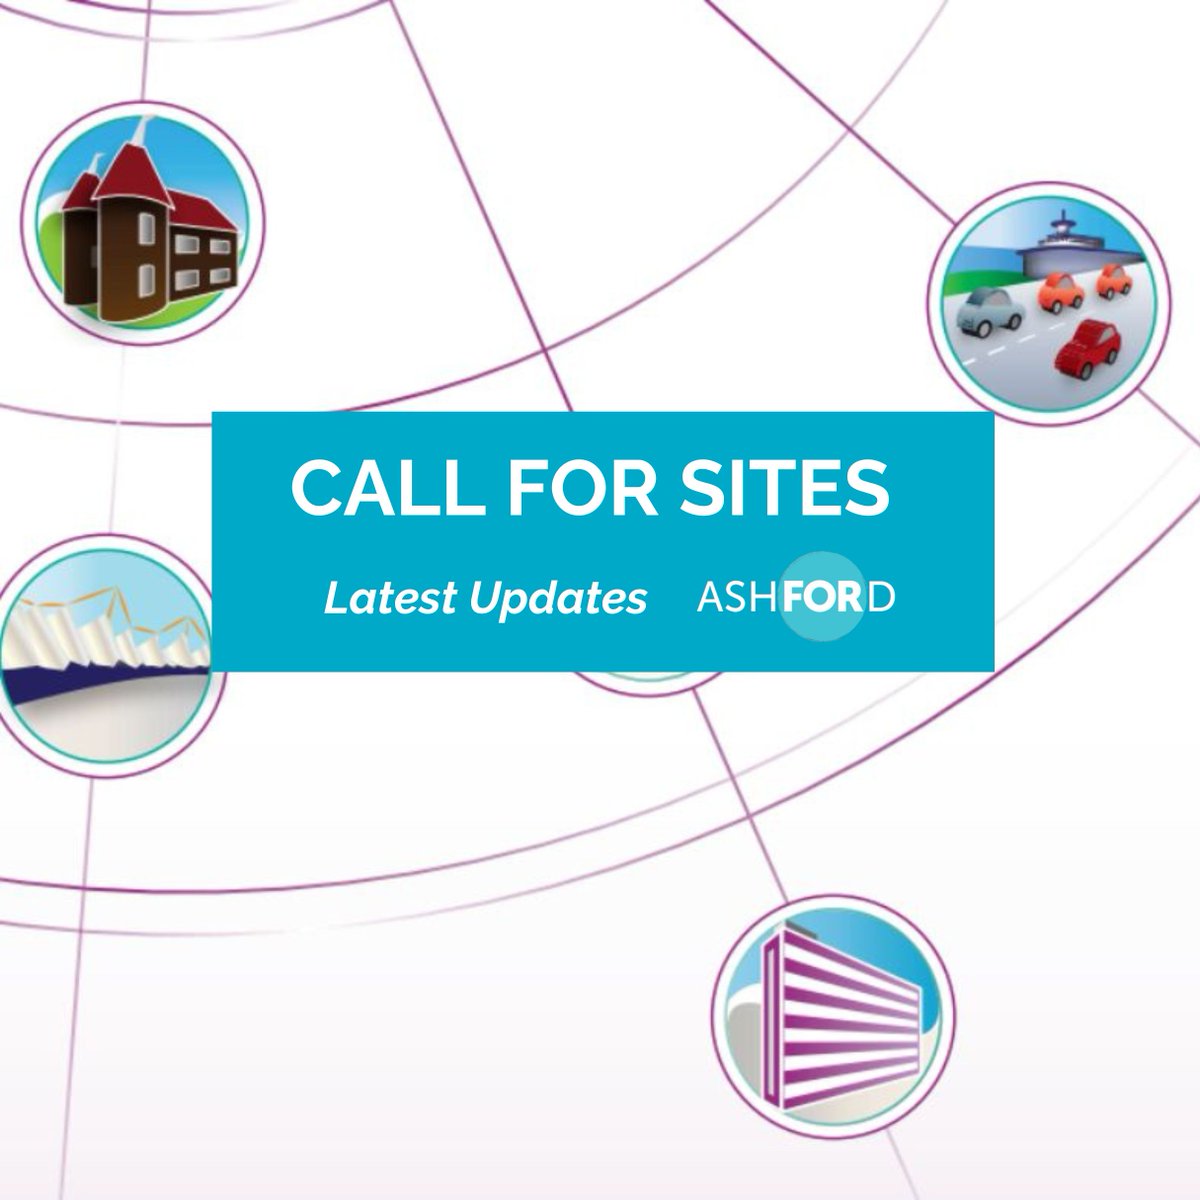 Ashford Borough Council has released details regarding the sites submitted during the recent 'Call for Sites' exercise for the Local Plan 2041. View which sites have been suggested here orlo.uk/egEdE